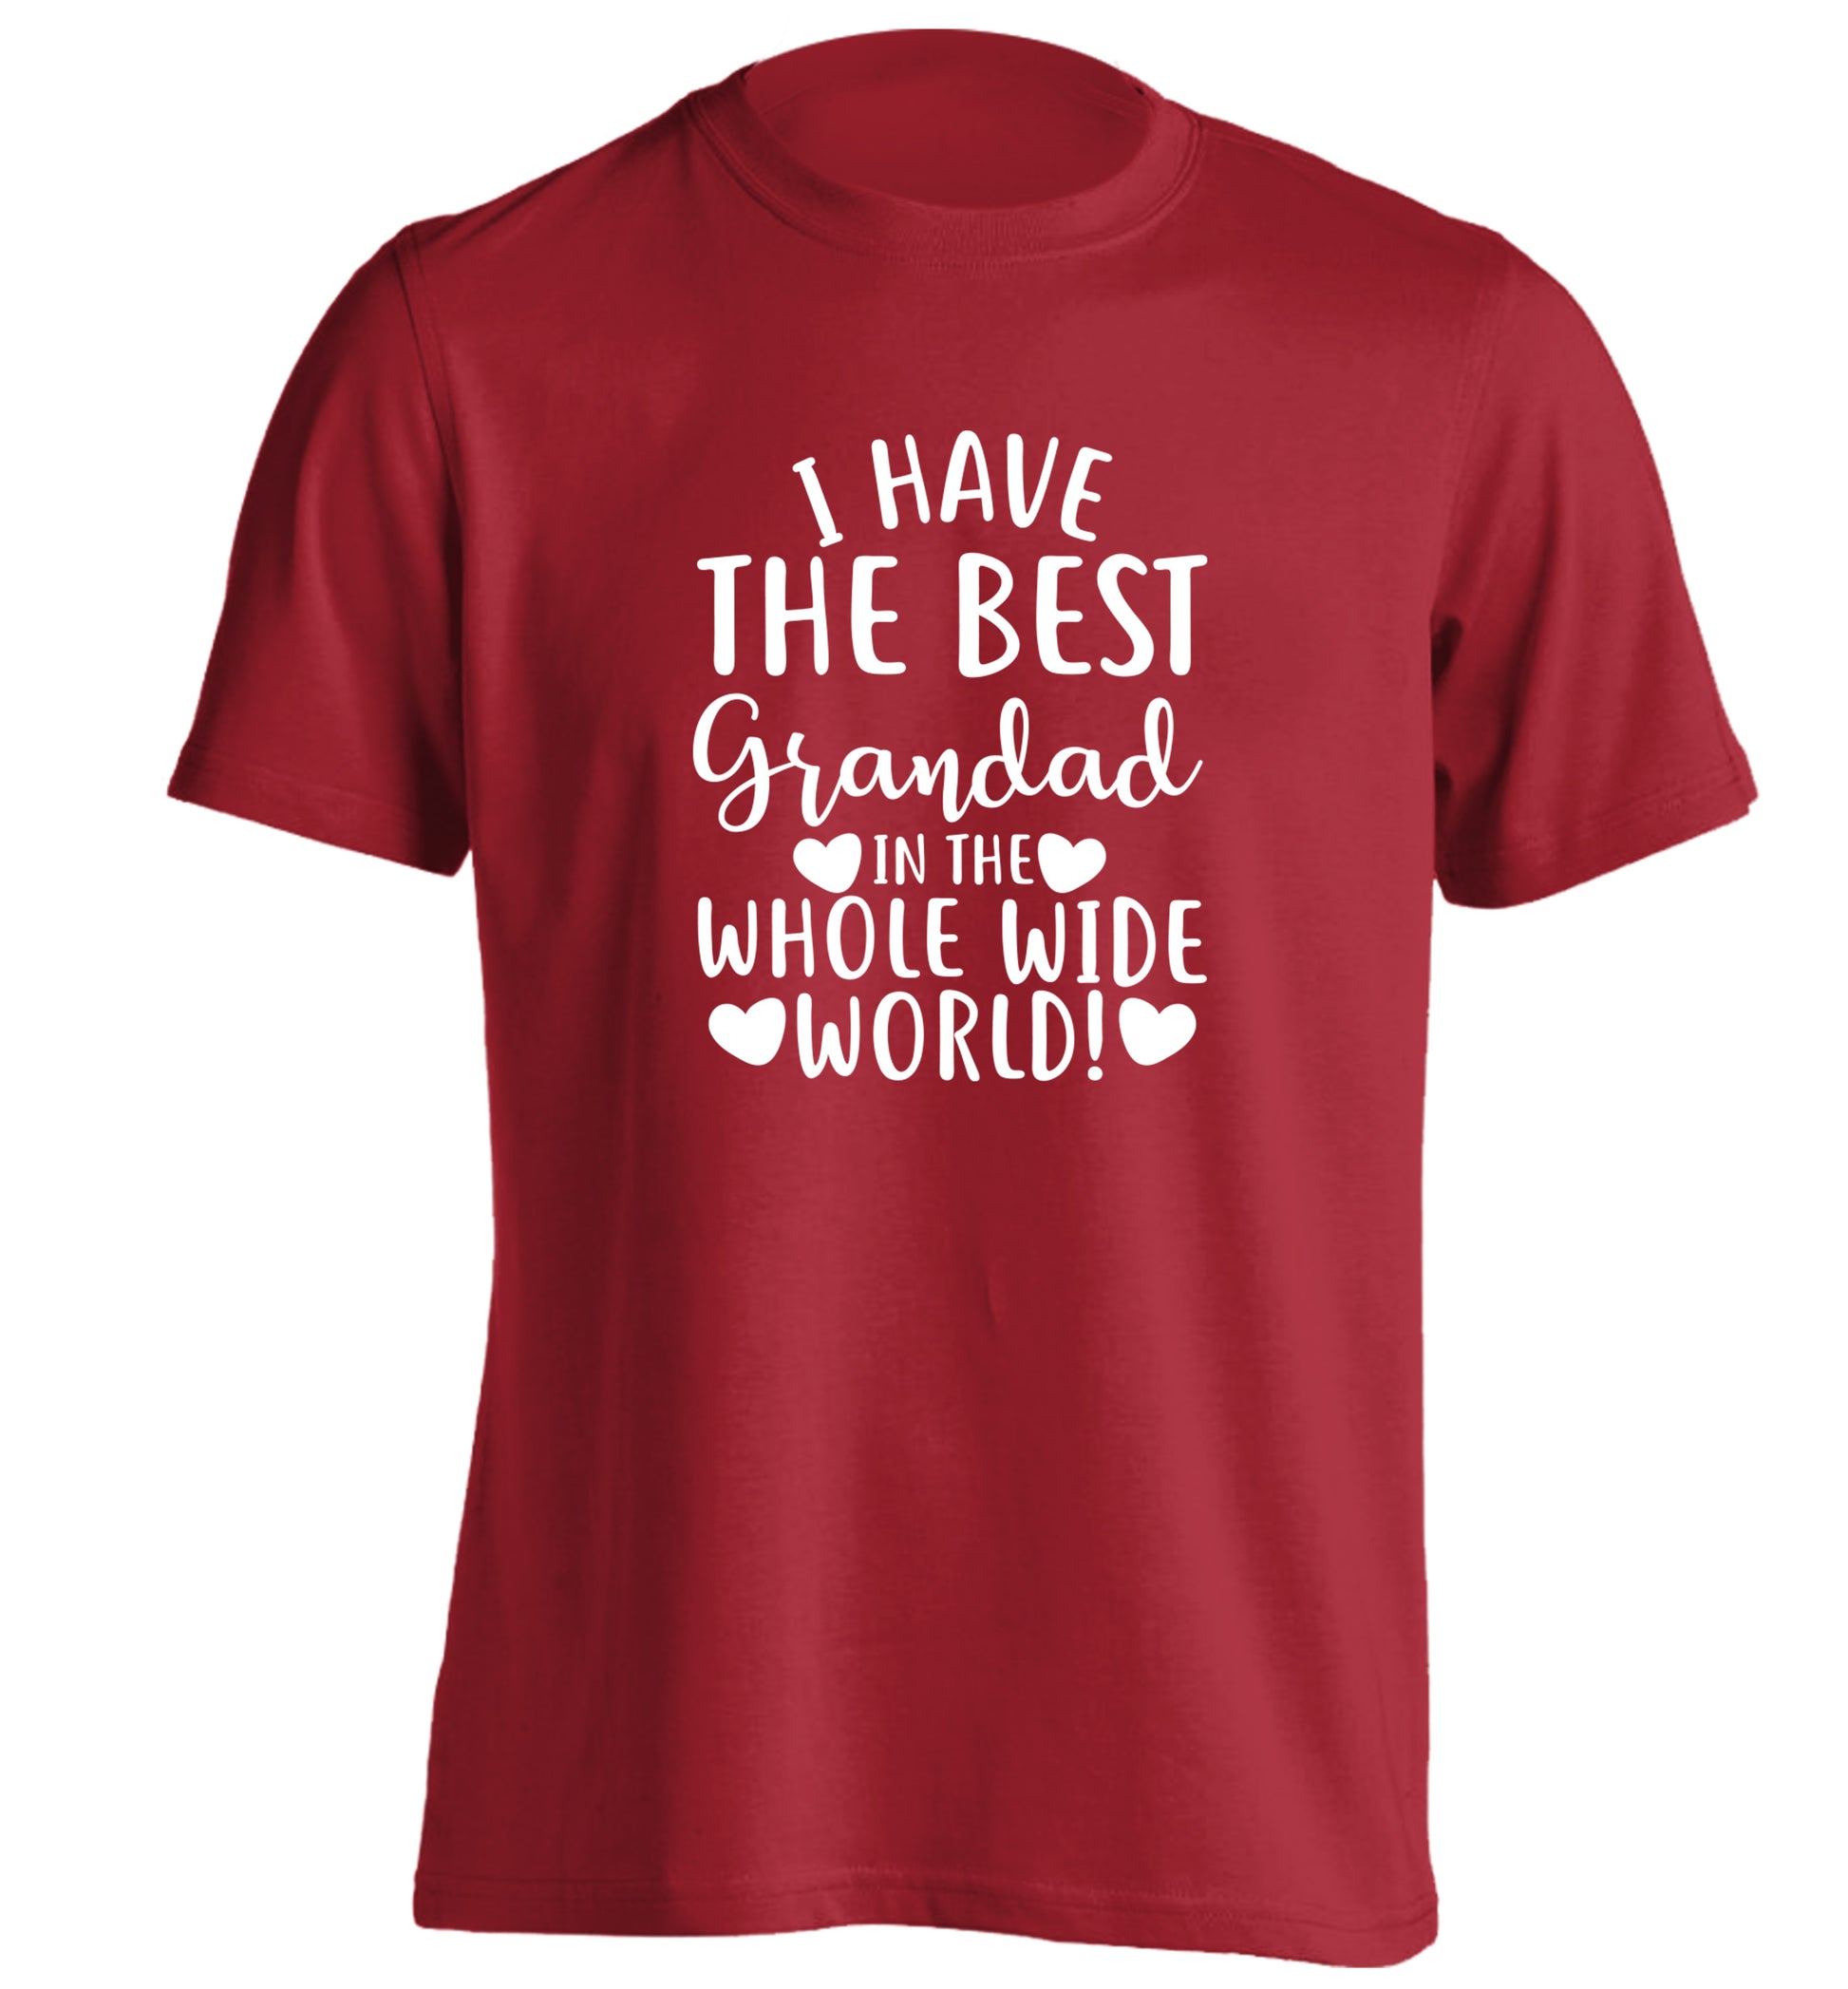 I have the best grandad in the whole wide world! adults unisex red Tshirt 2XL